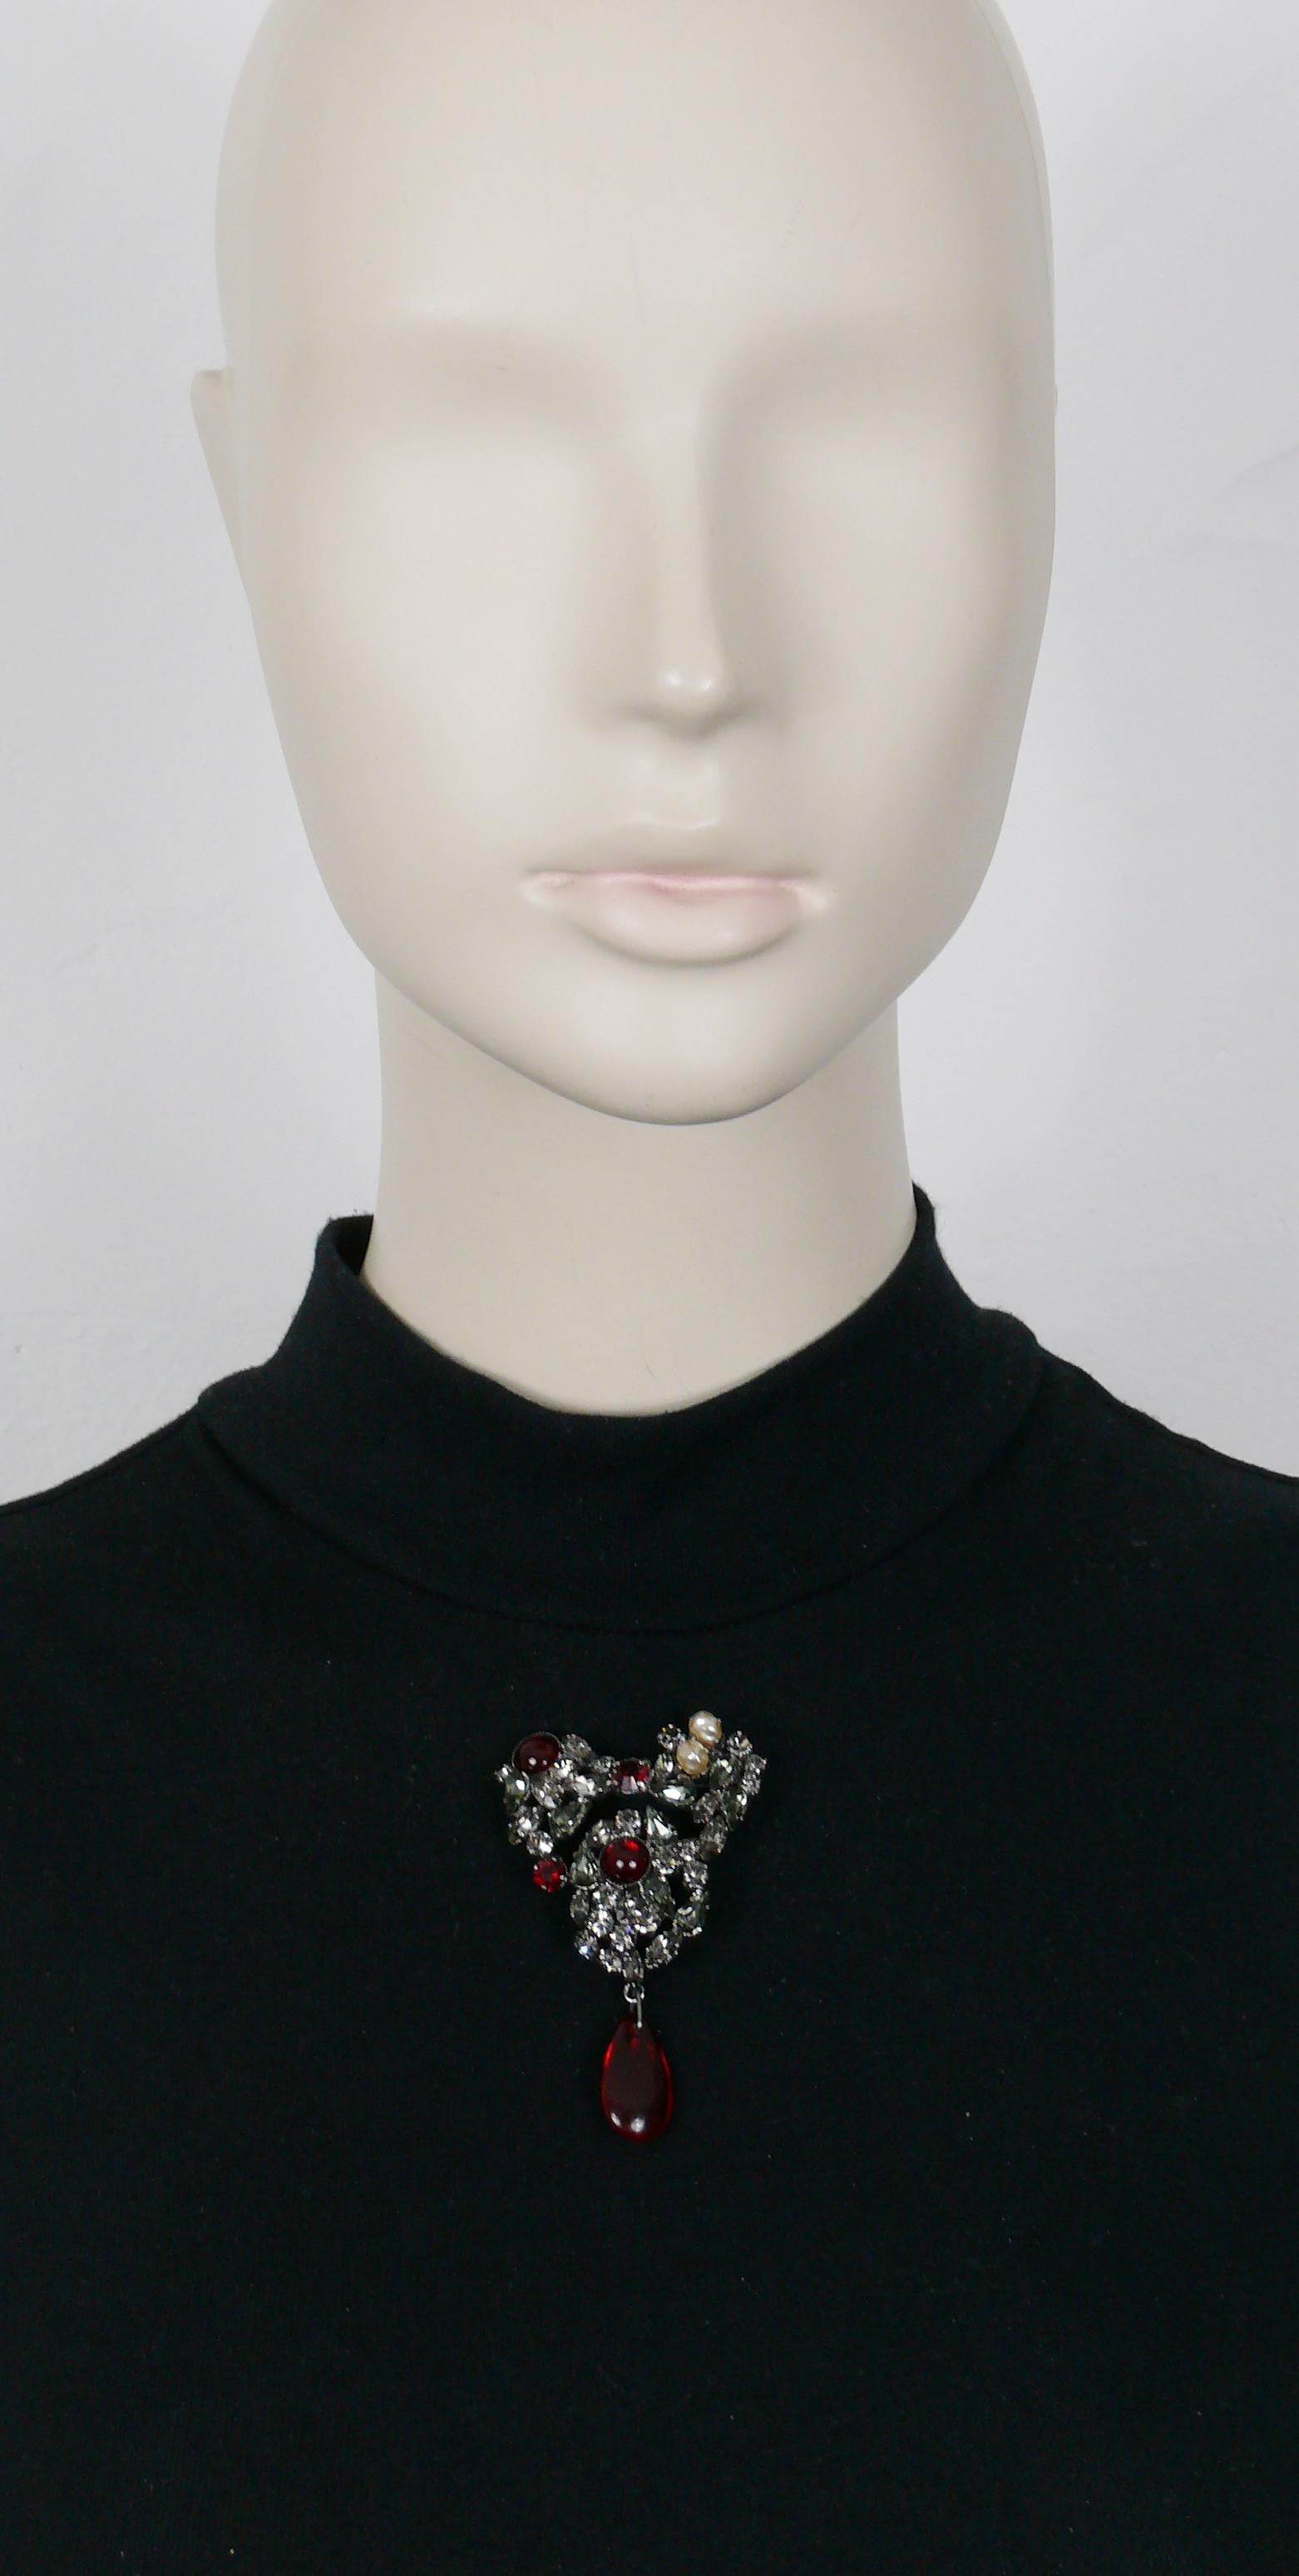 YVES SAINT LAURENT Haute Couture iconic gun patina tone heart brooch embellished with grey crystals, ruby color crystals and glass cabochons, faux pearls and a red glass drop.

Embossed YSL Haute Couture.

Indicative measurements : max. height